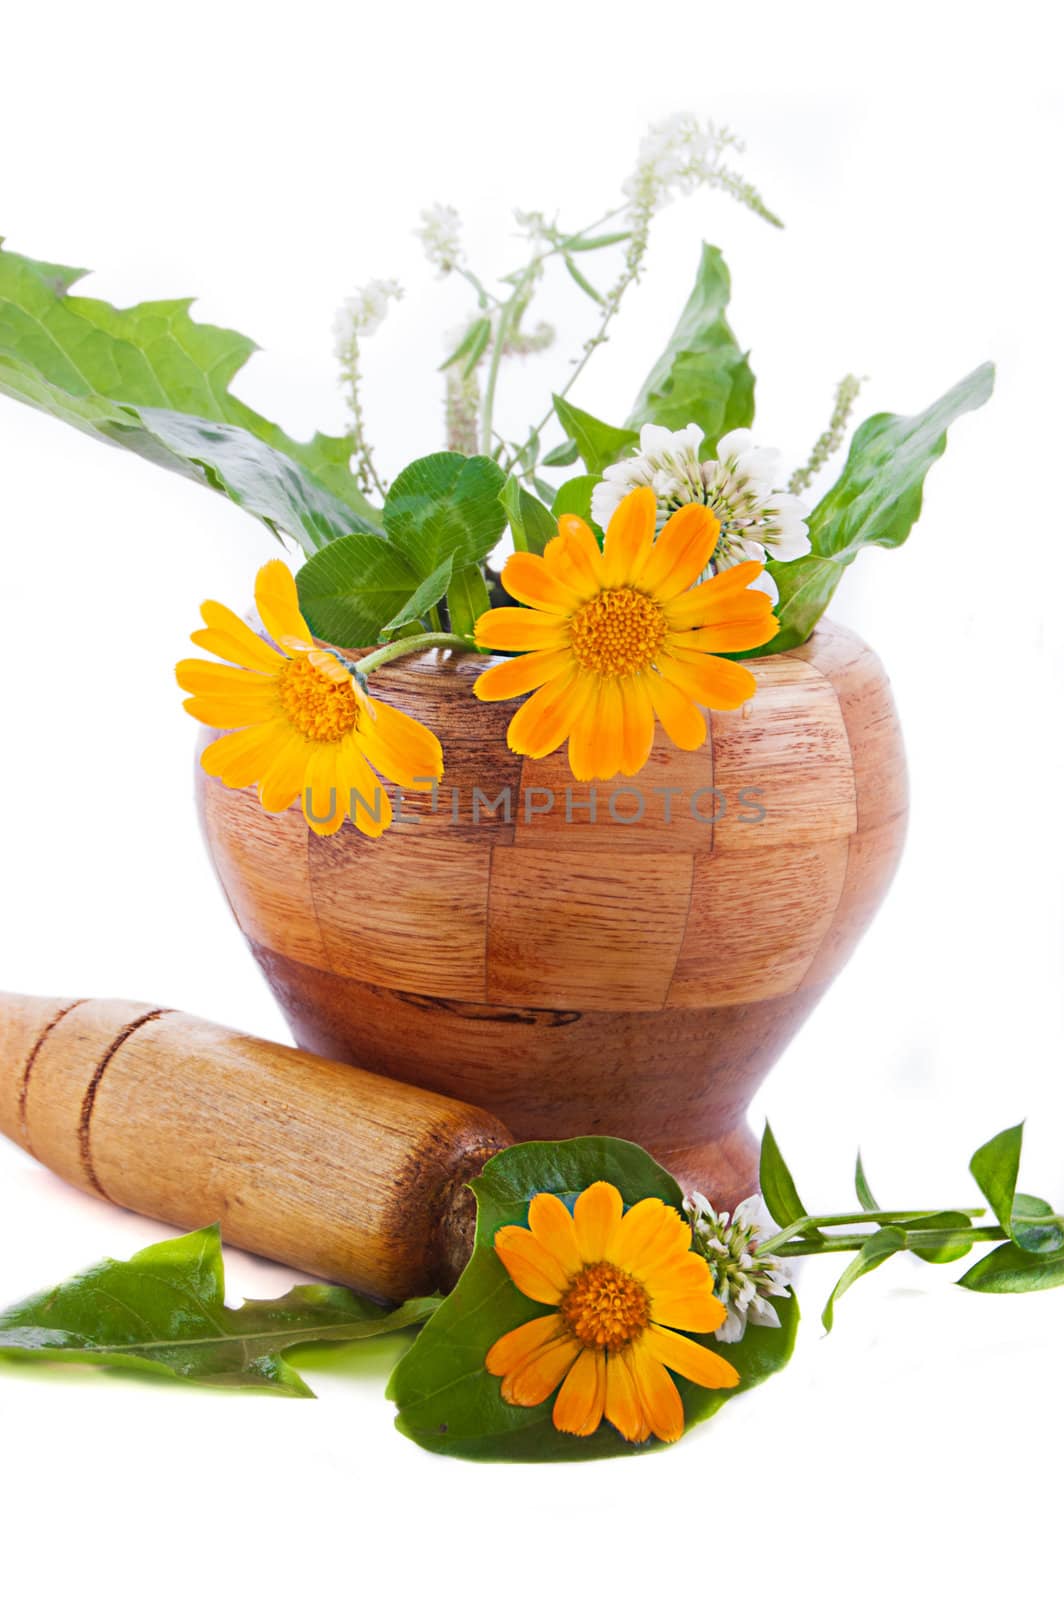 Mortar with herbs and marigolds by Angel_a